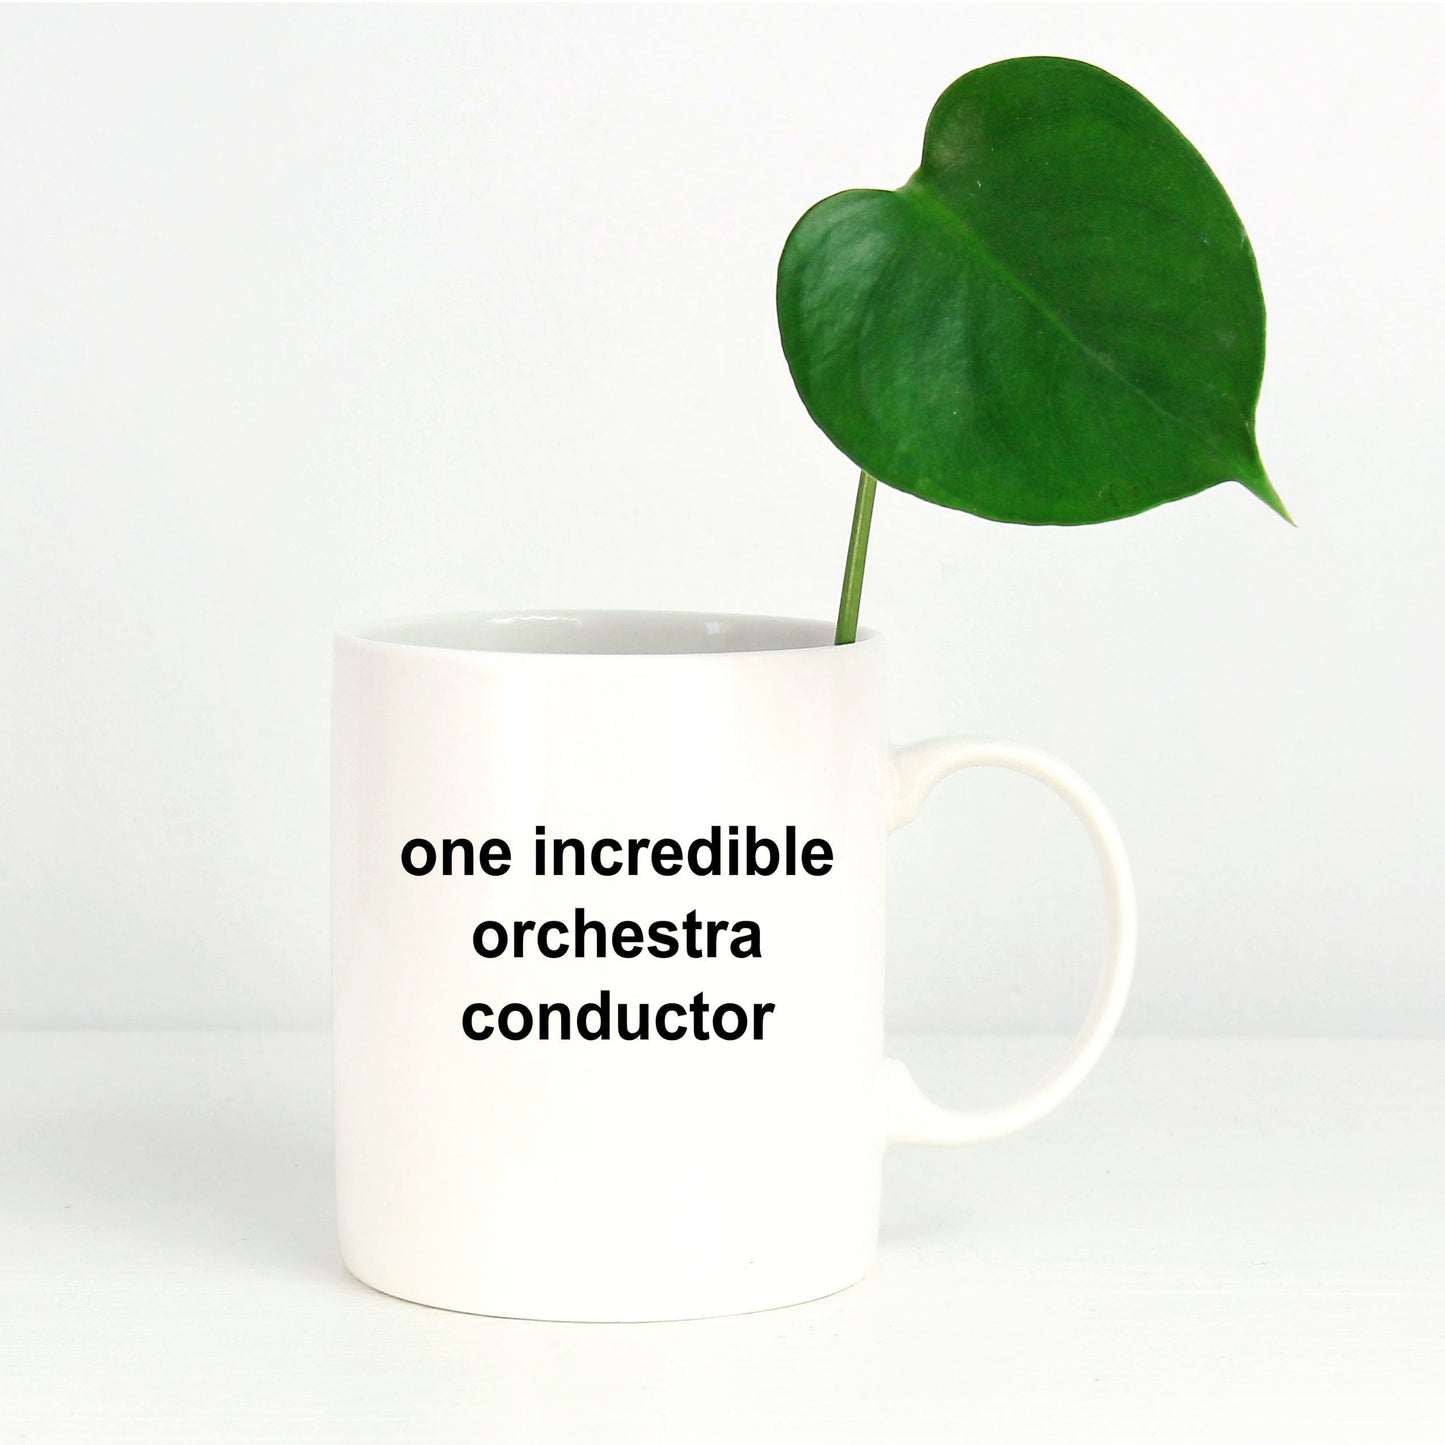 One Incredible Orchestra Conductor Coffee Mug